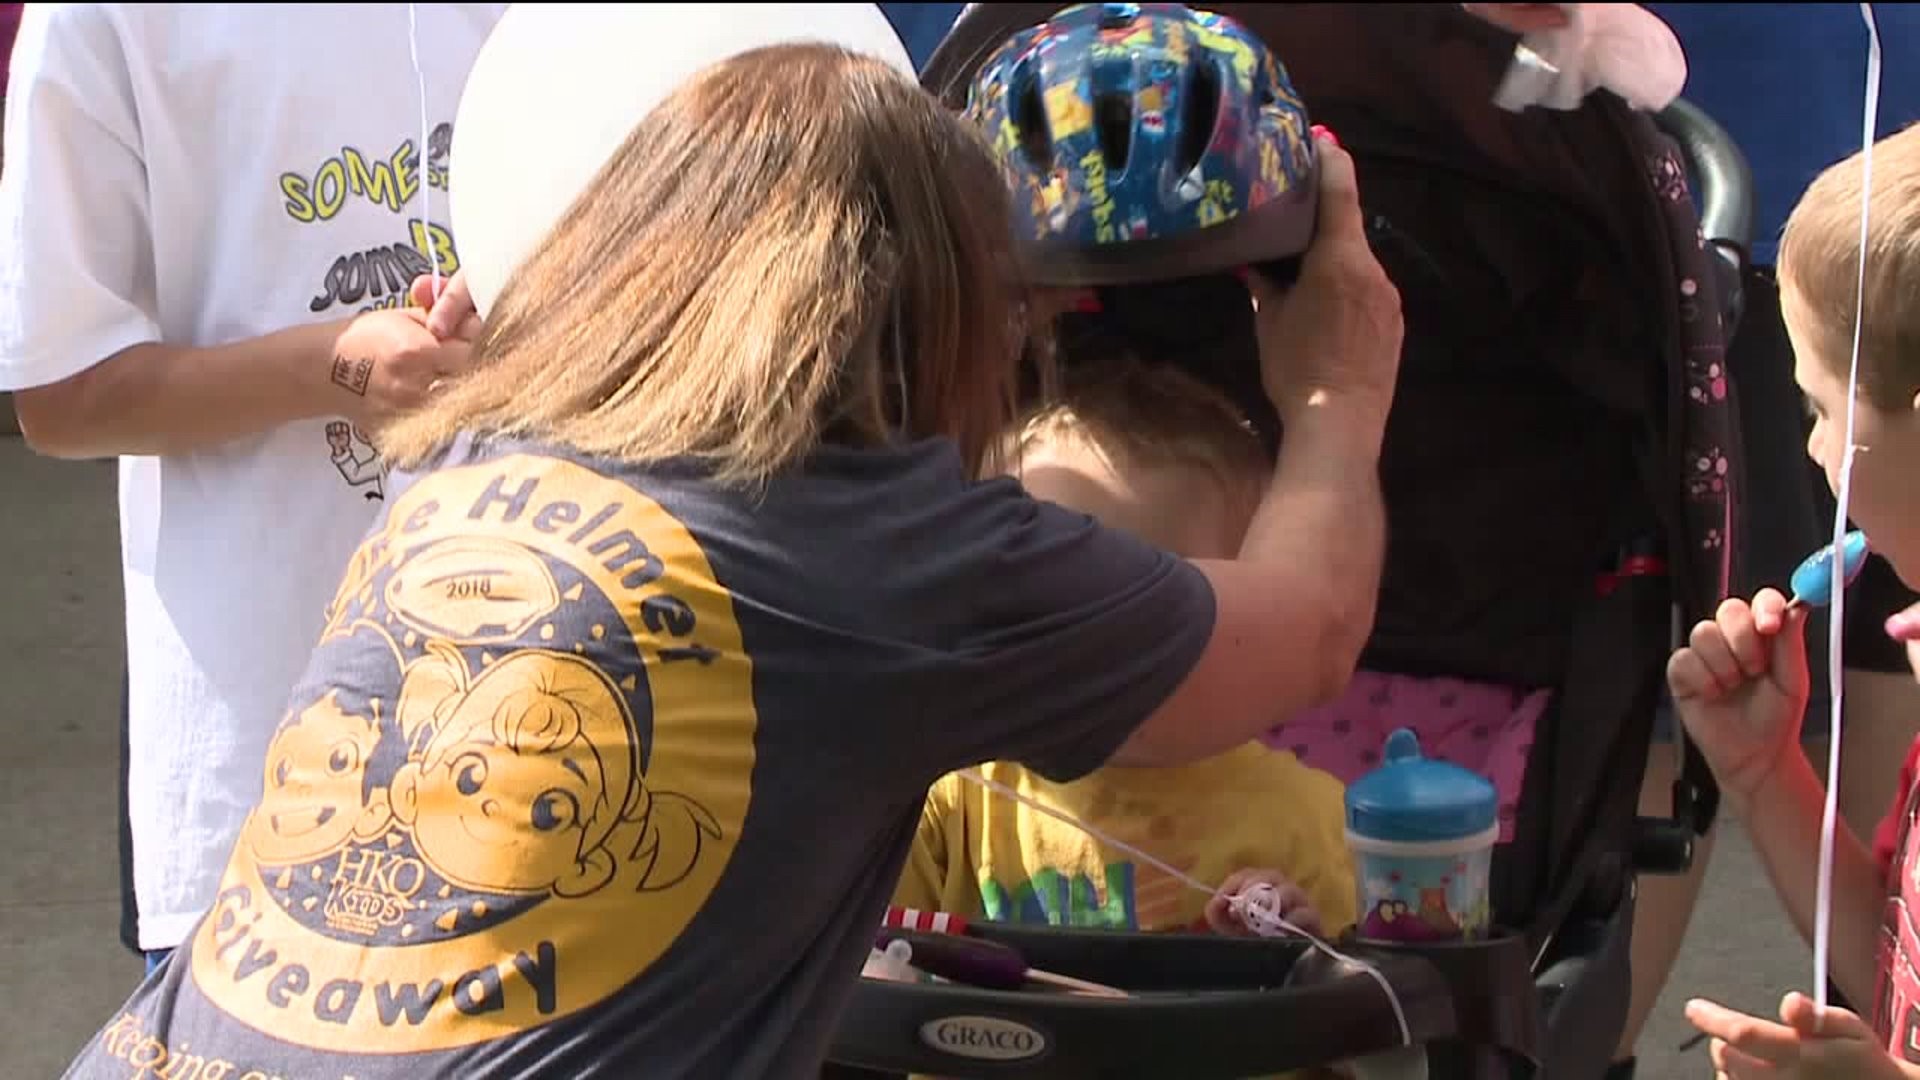 Local Law Firm Continues Free Helmet Giveaway in Scranton